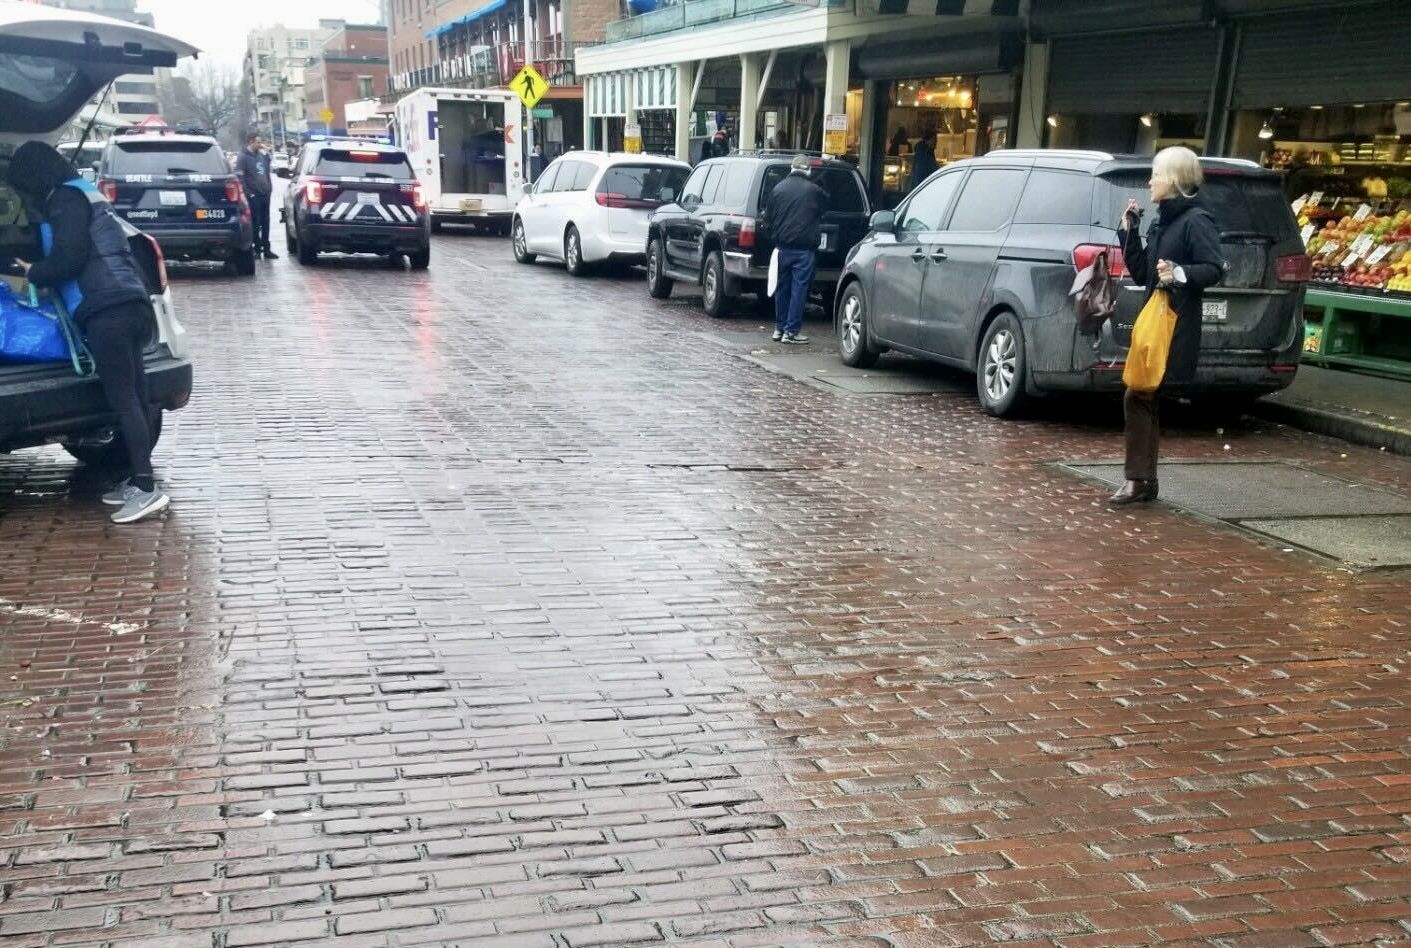 A view of wet cobblestones and cars along the street. 